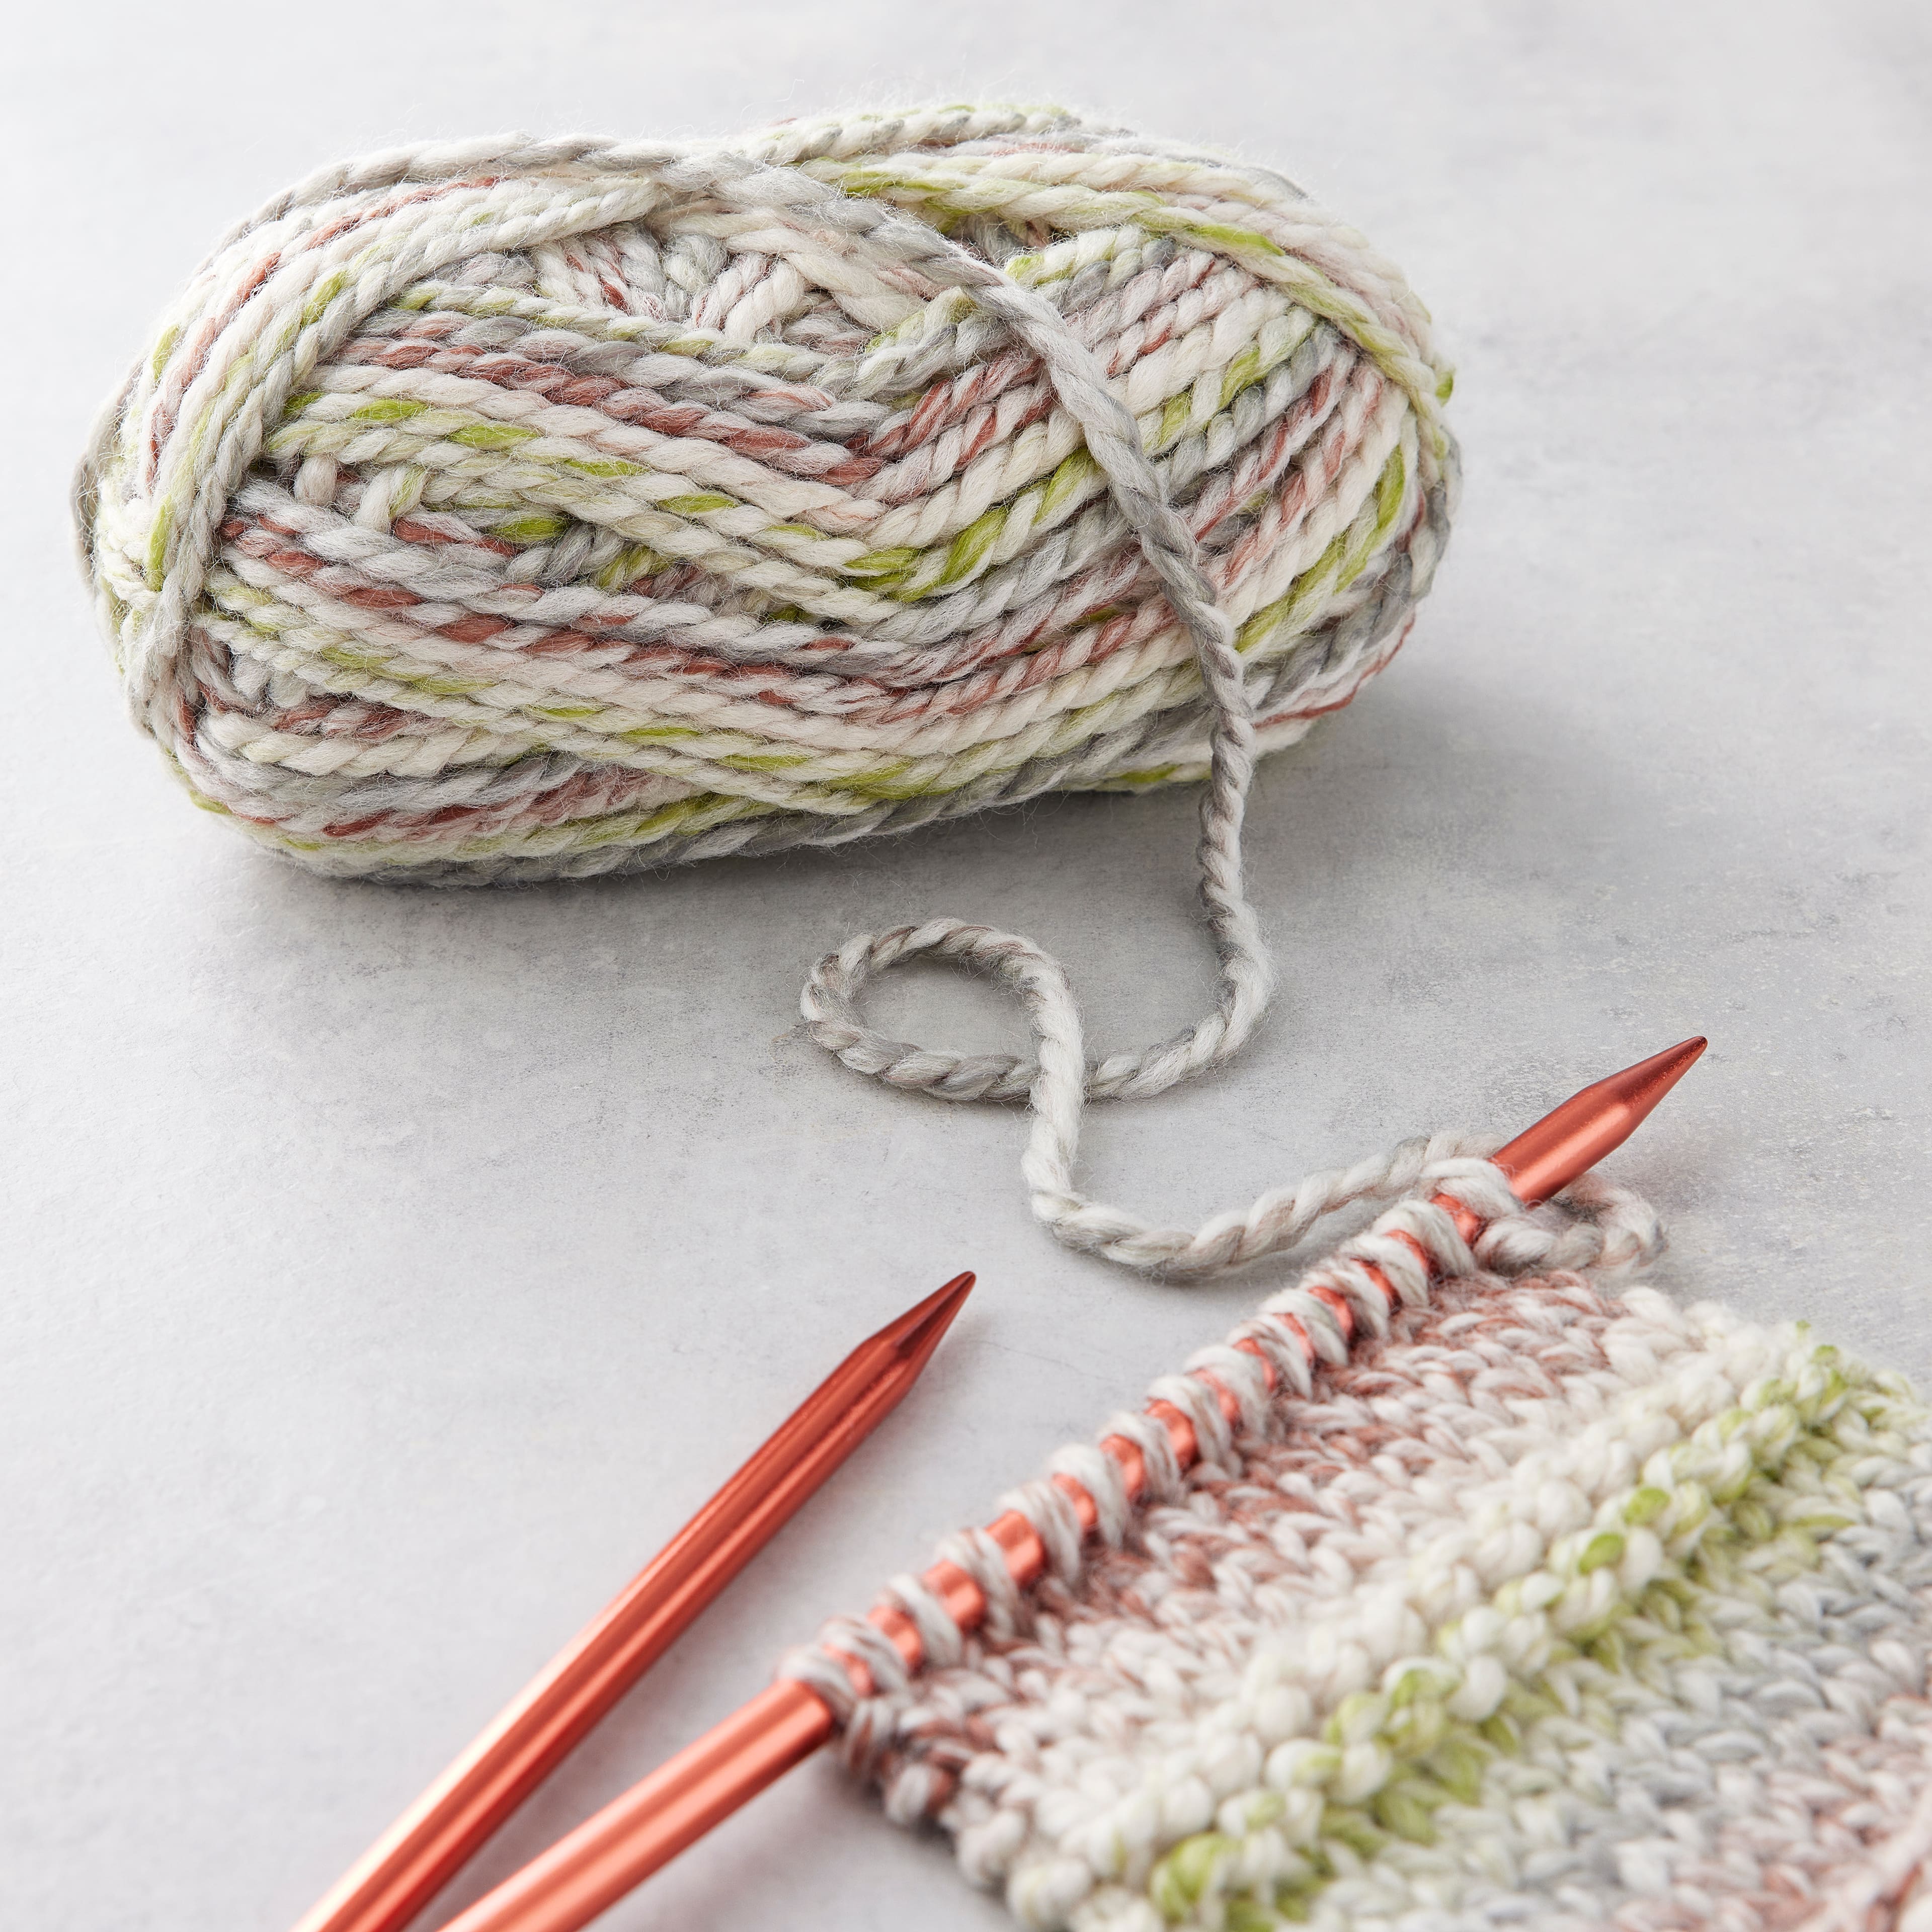 Lion Brand Wool-Ease Thick & Quick Yarn Fern